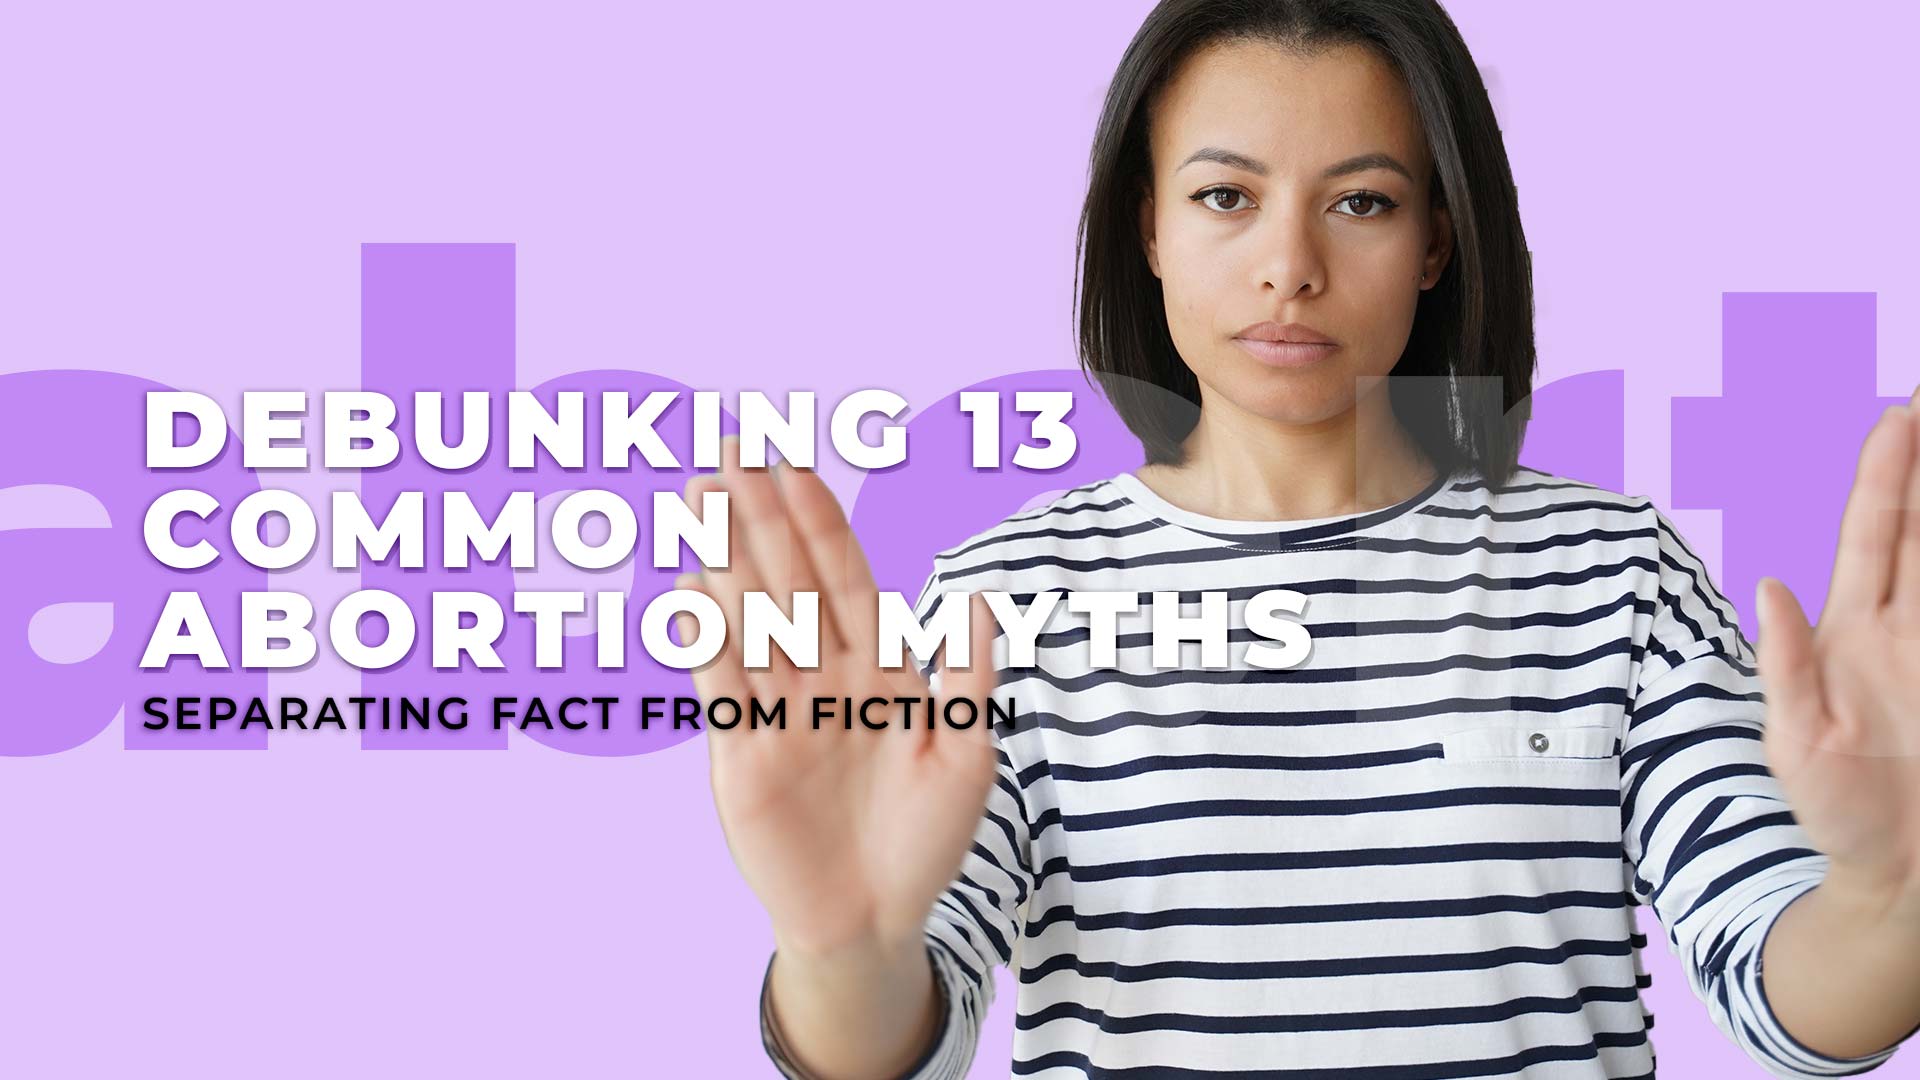 Debunking 13 Common Abortion Myths